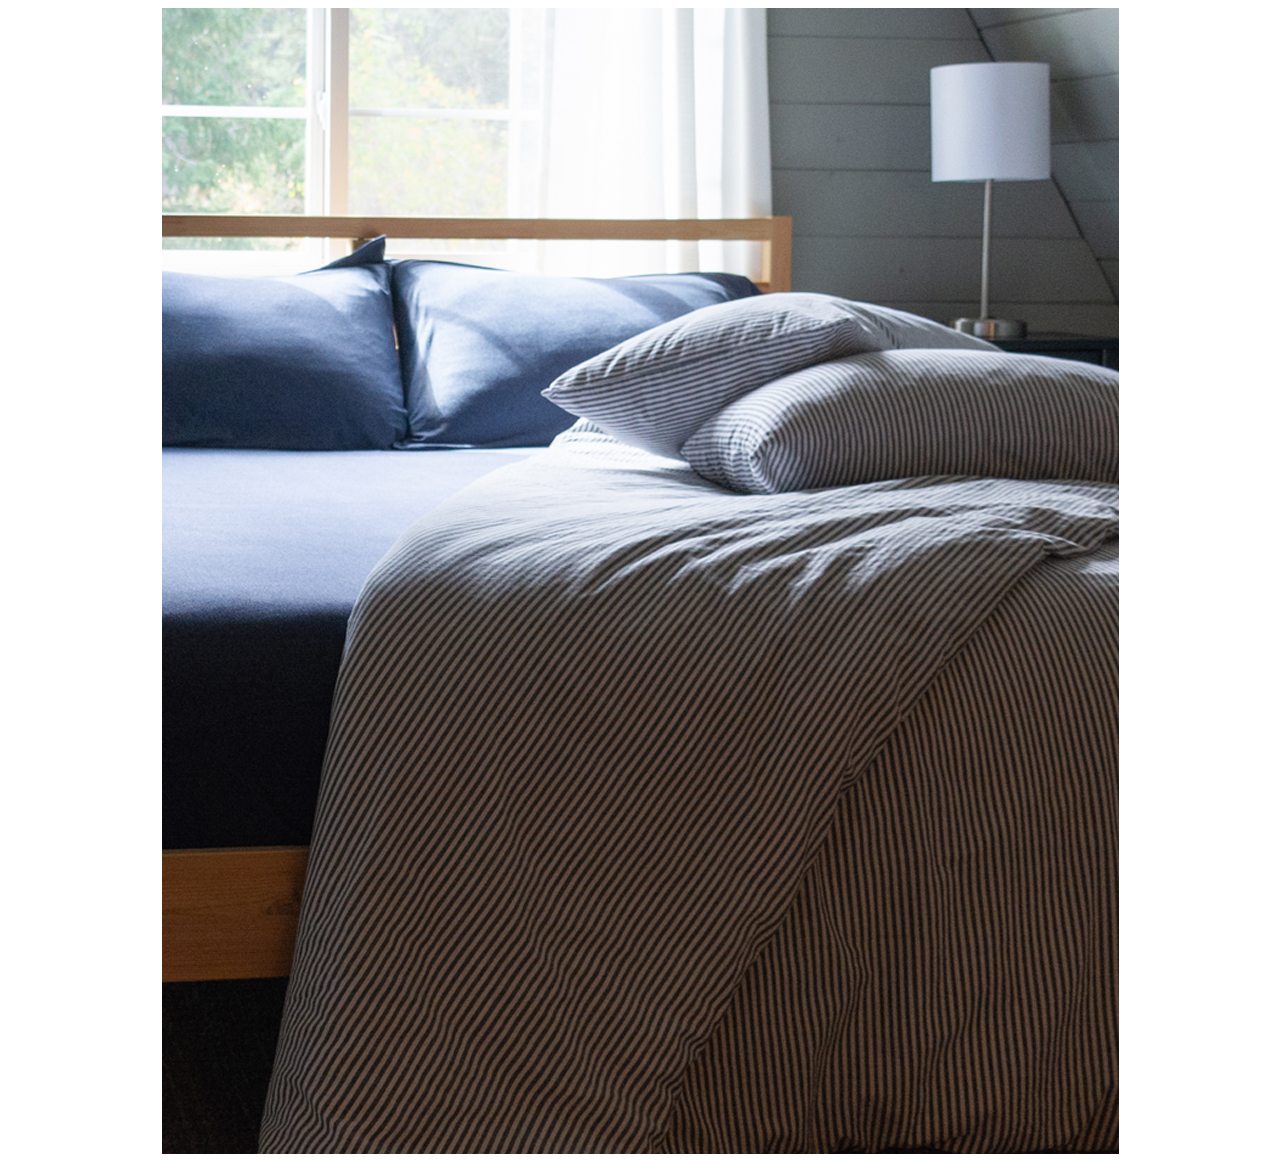 Our 100% Organic Cotton Bedding is HERE